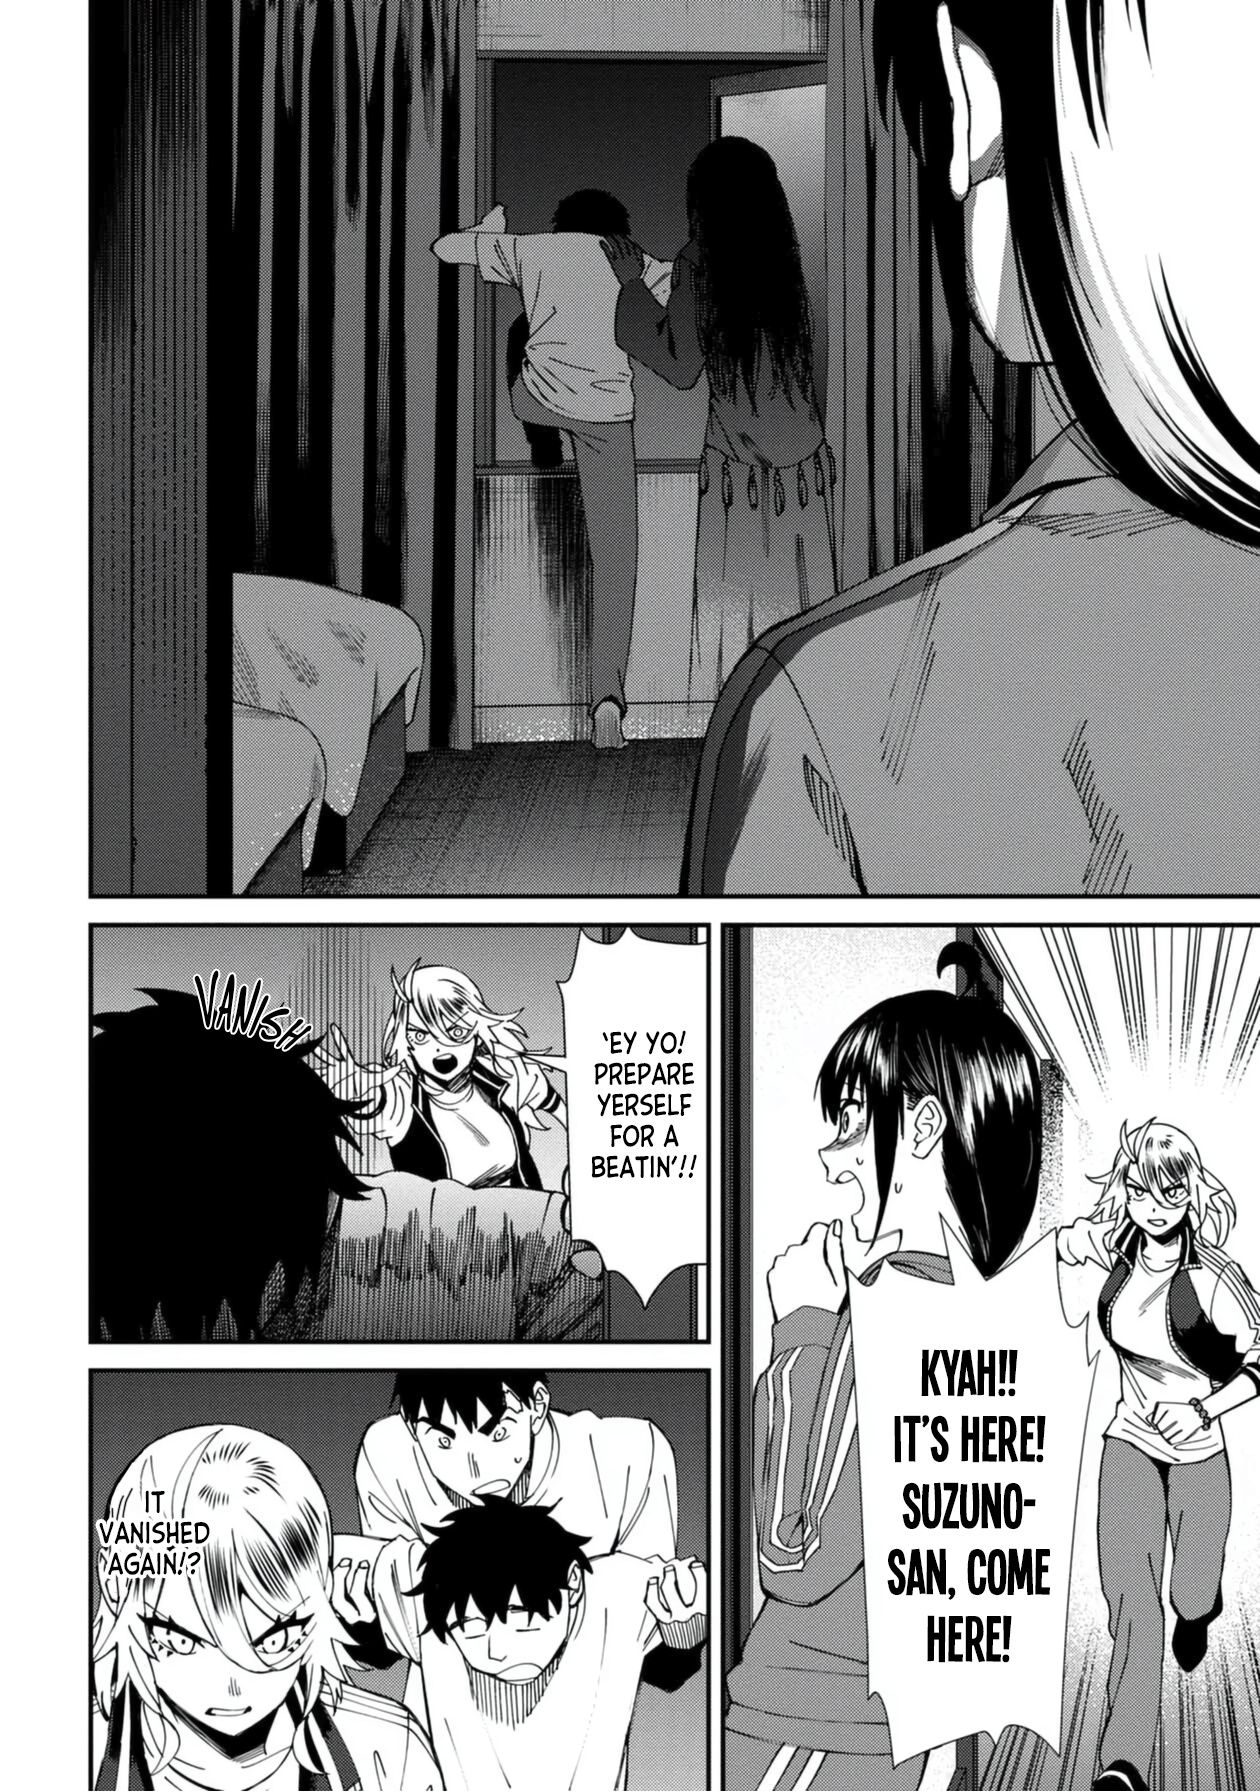 Bad Girl-Exorcist Reina Vol.5 Chapter 56: Exorcism #56 - Posthumous Marriage - Picture 2